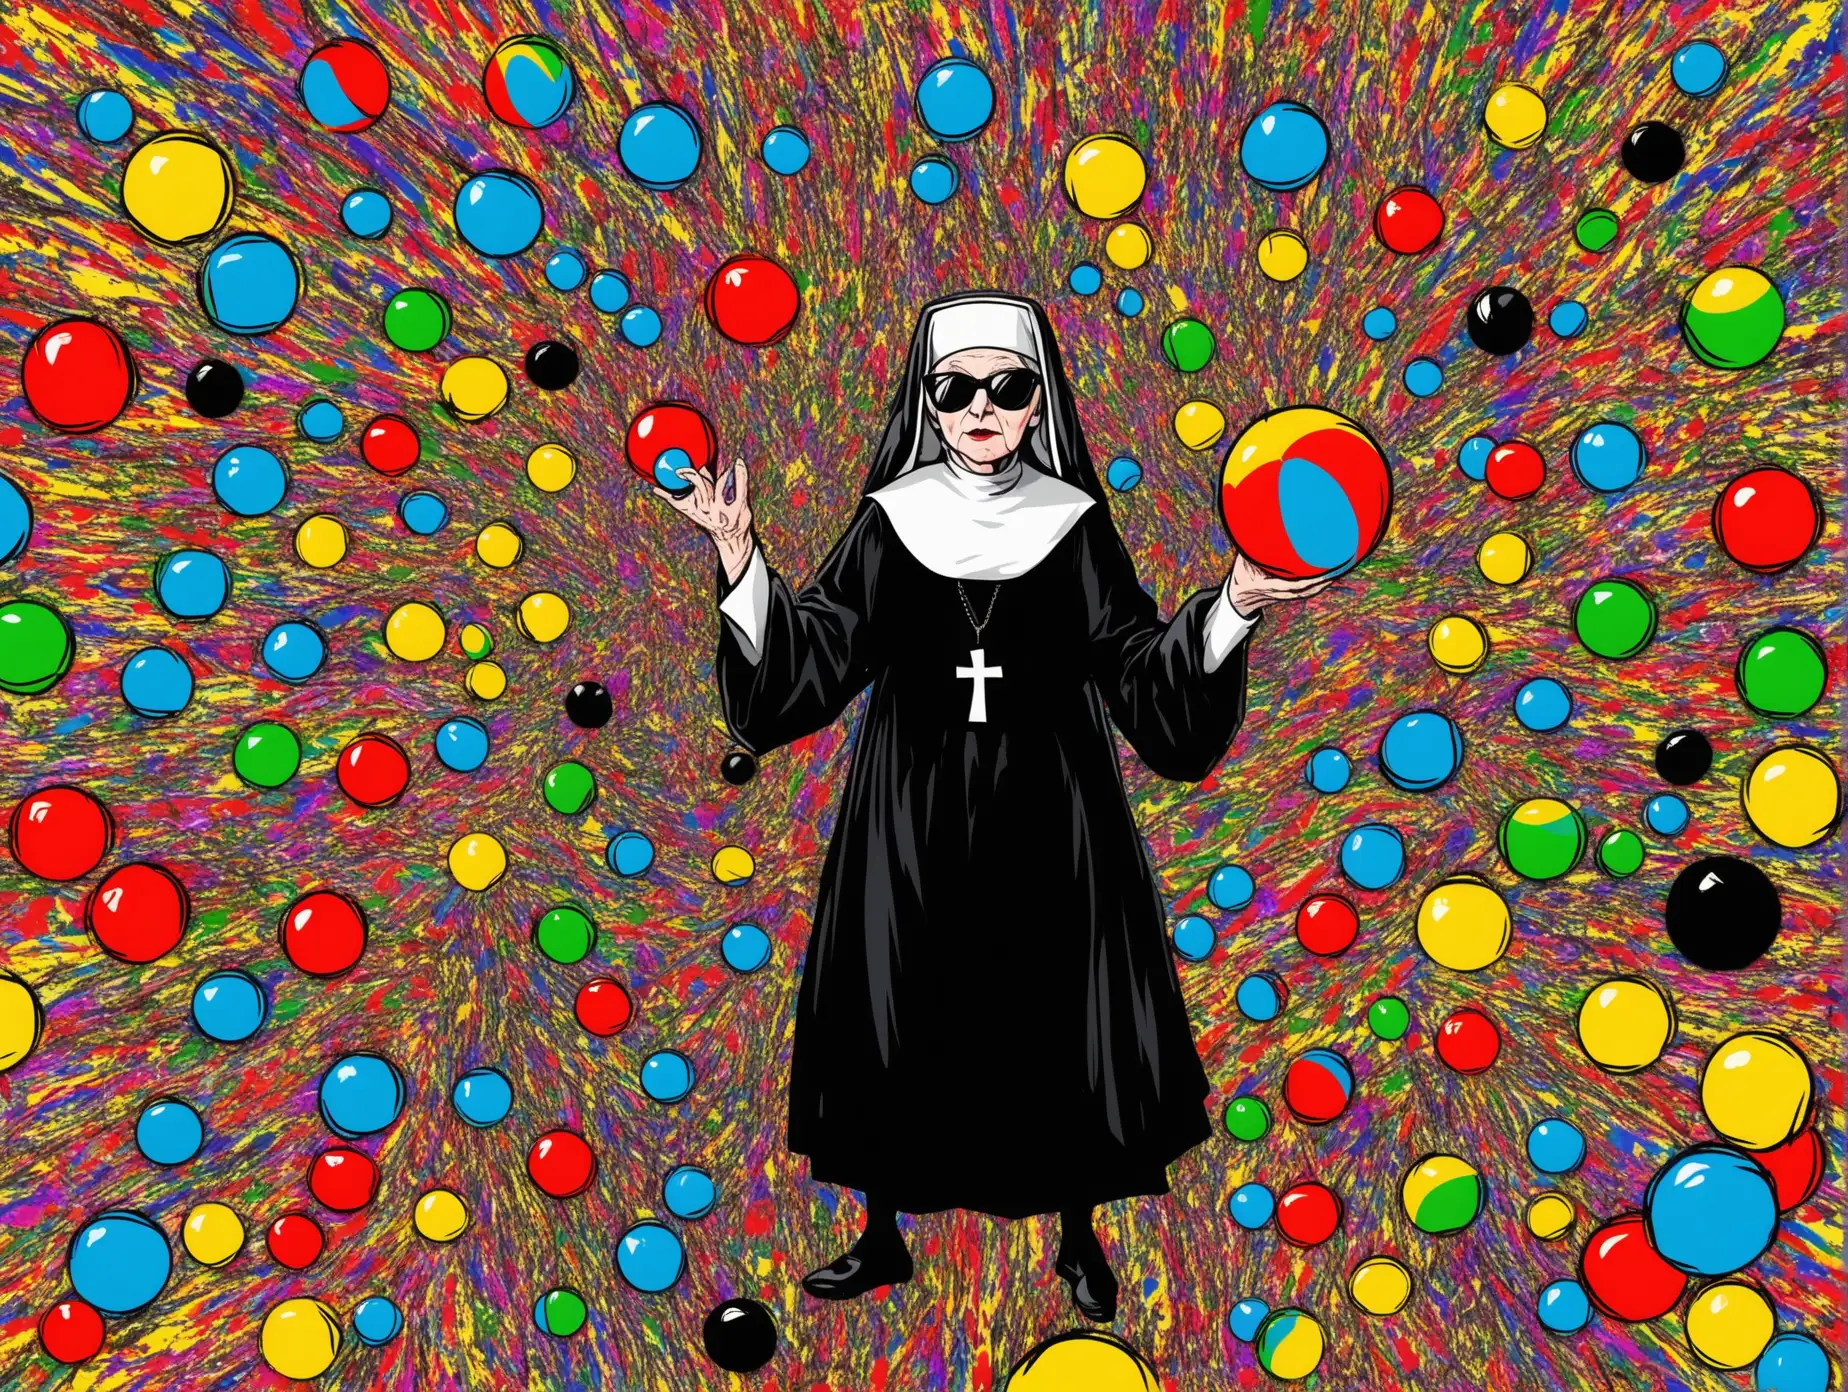 CRAZY OLD NUN WEARING SUNGLASSES JUGGLING BALL  IN STYLE OF JACKSON POLLOCK PSYCHEDELIC, CRAZY BACKGROUND, MOSTLY  

NUN JUGGLING BALL



